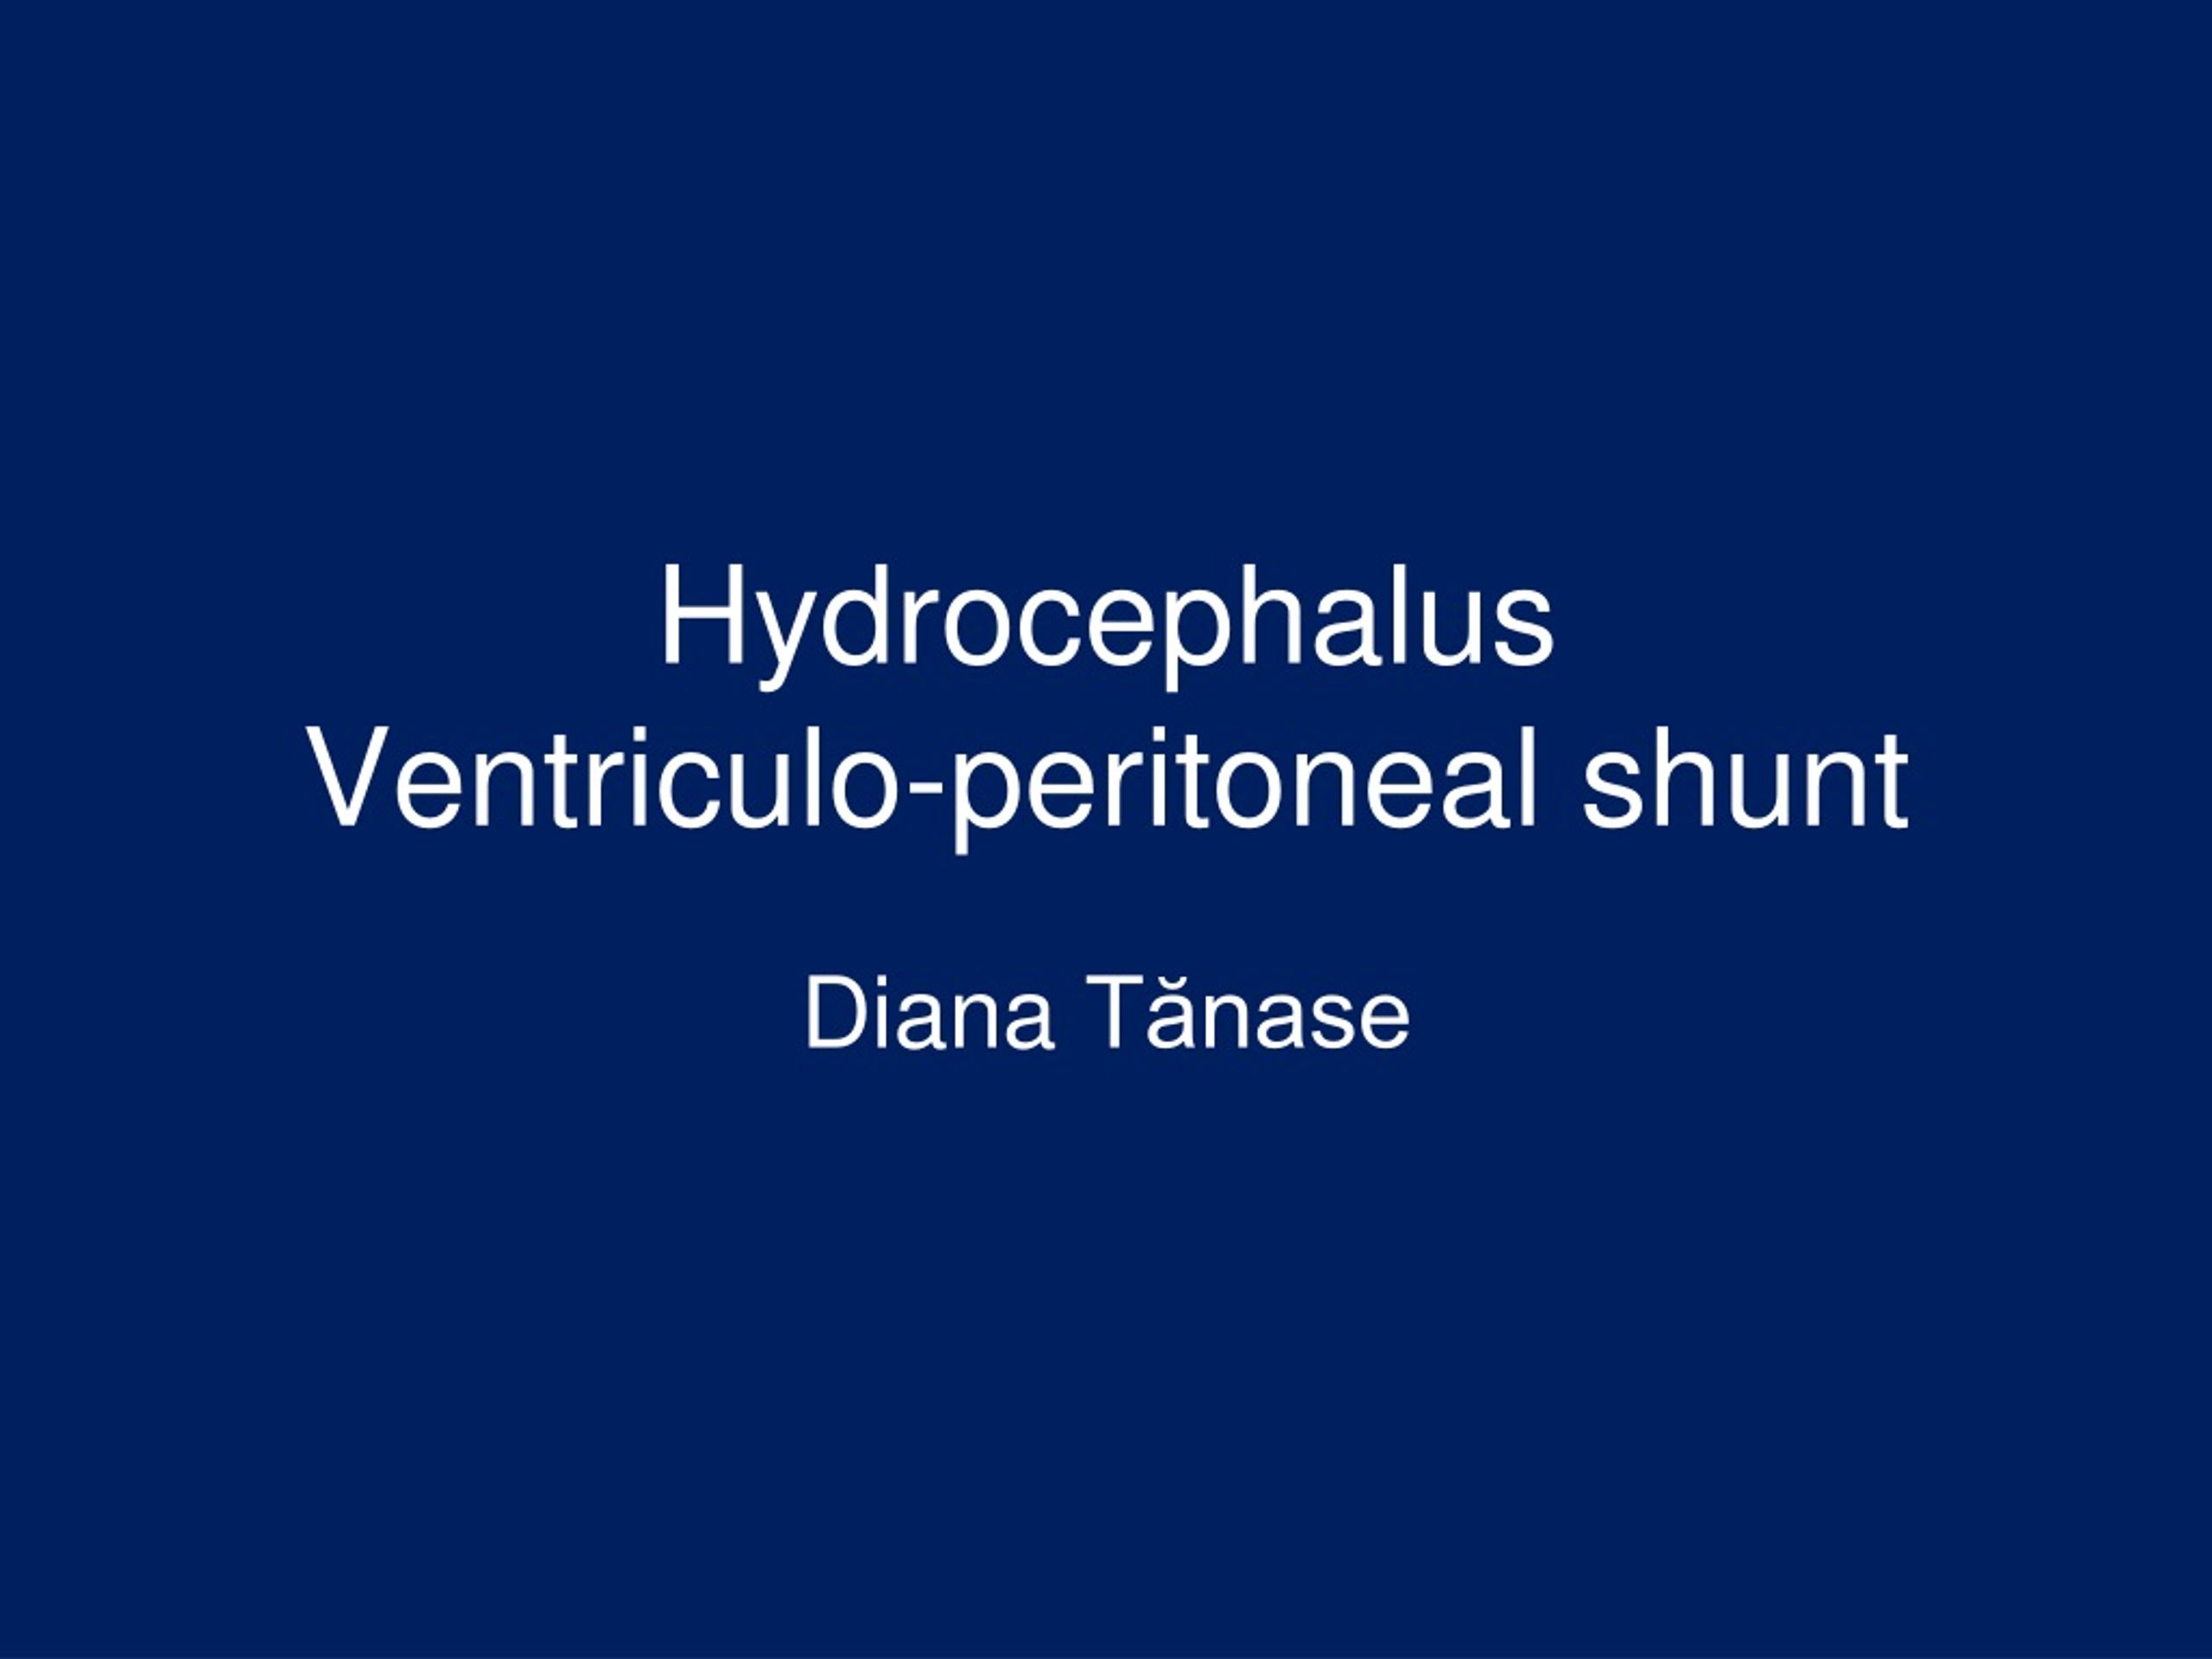 Ppt Hydrocephalus Ventriculo Peritoneal Shunt Powerpoint Presentation Id9224266 9634